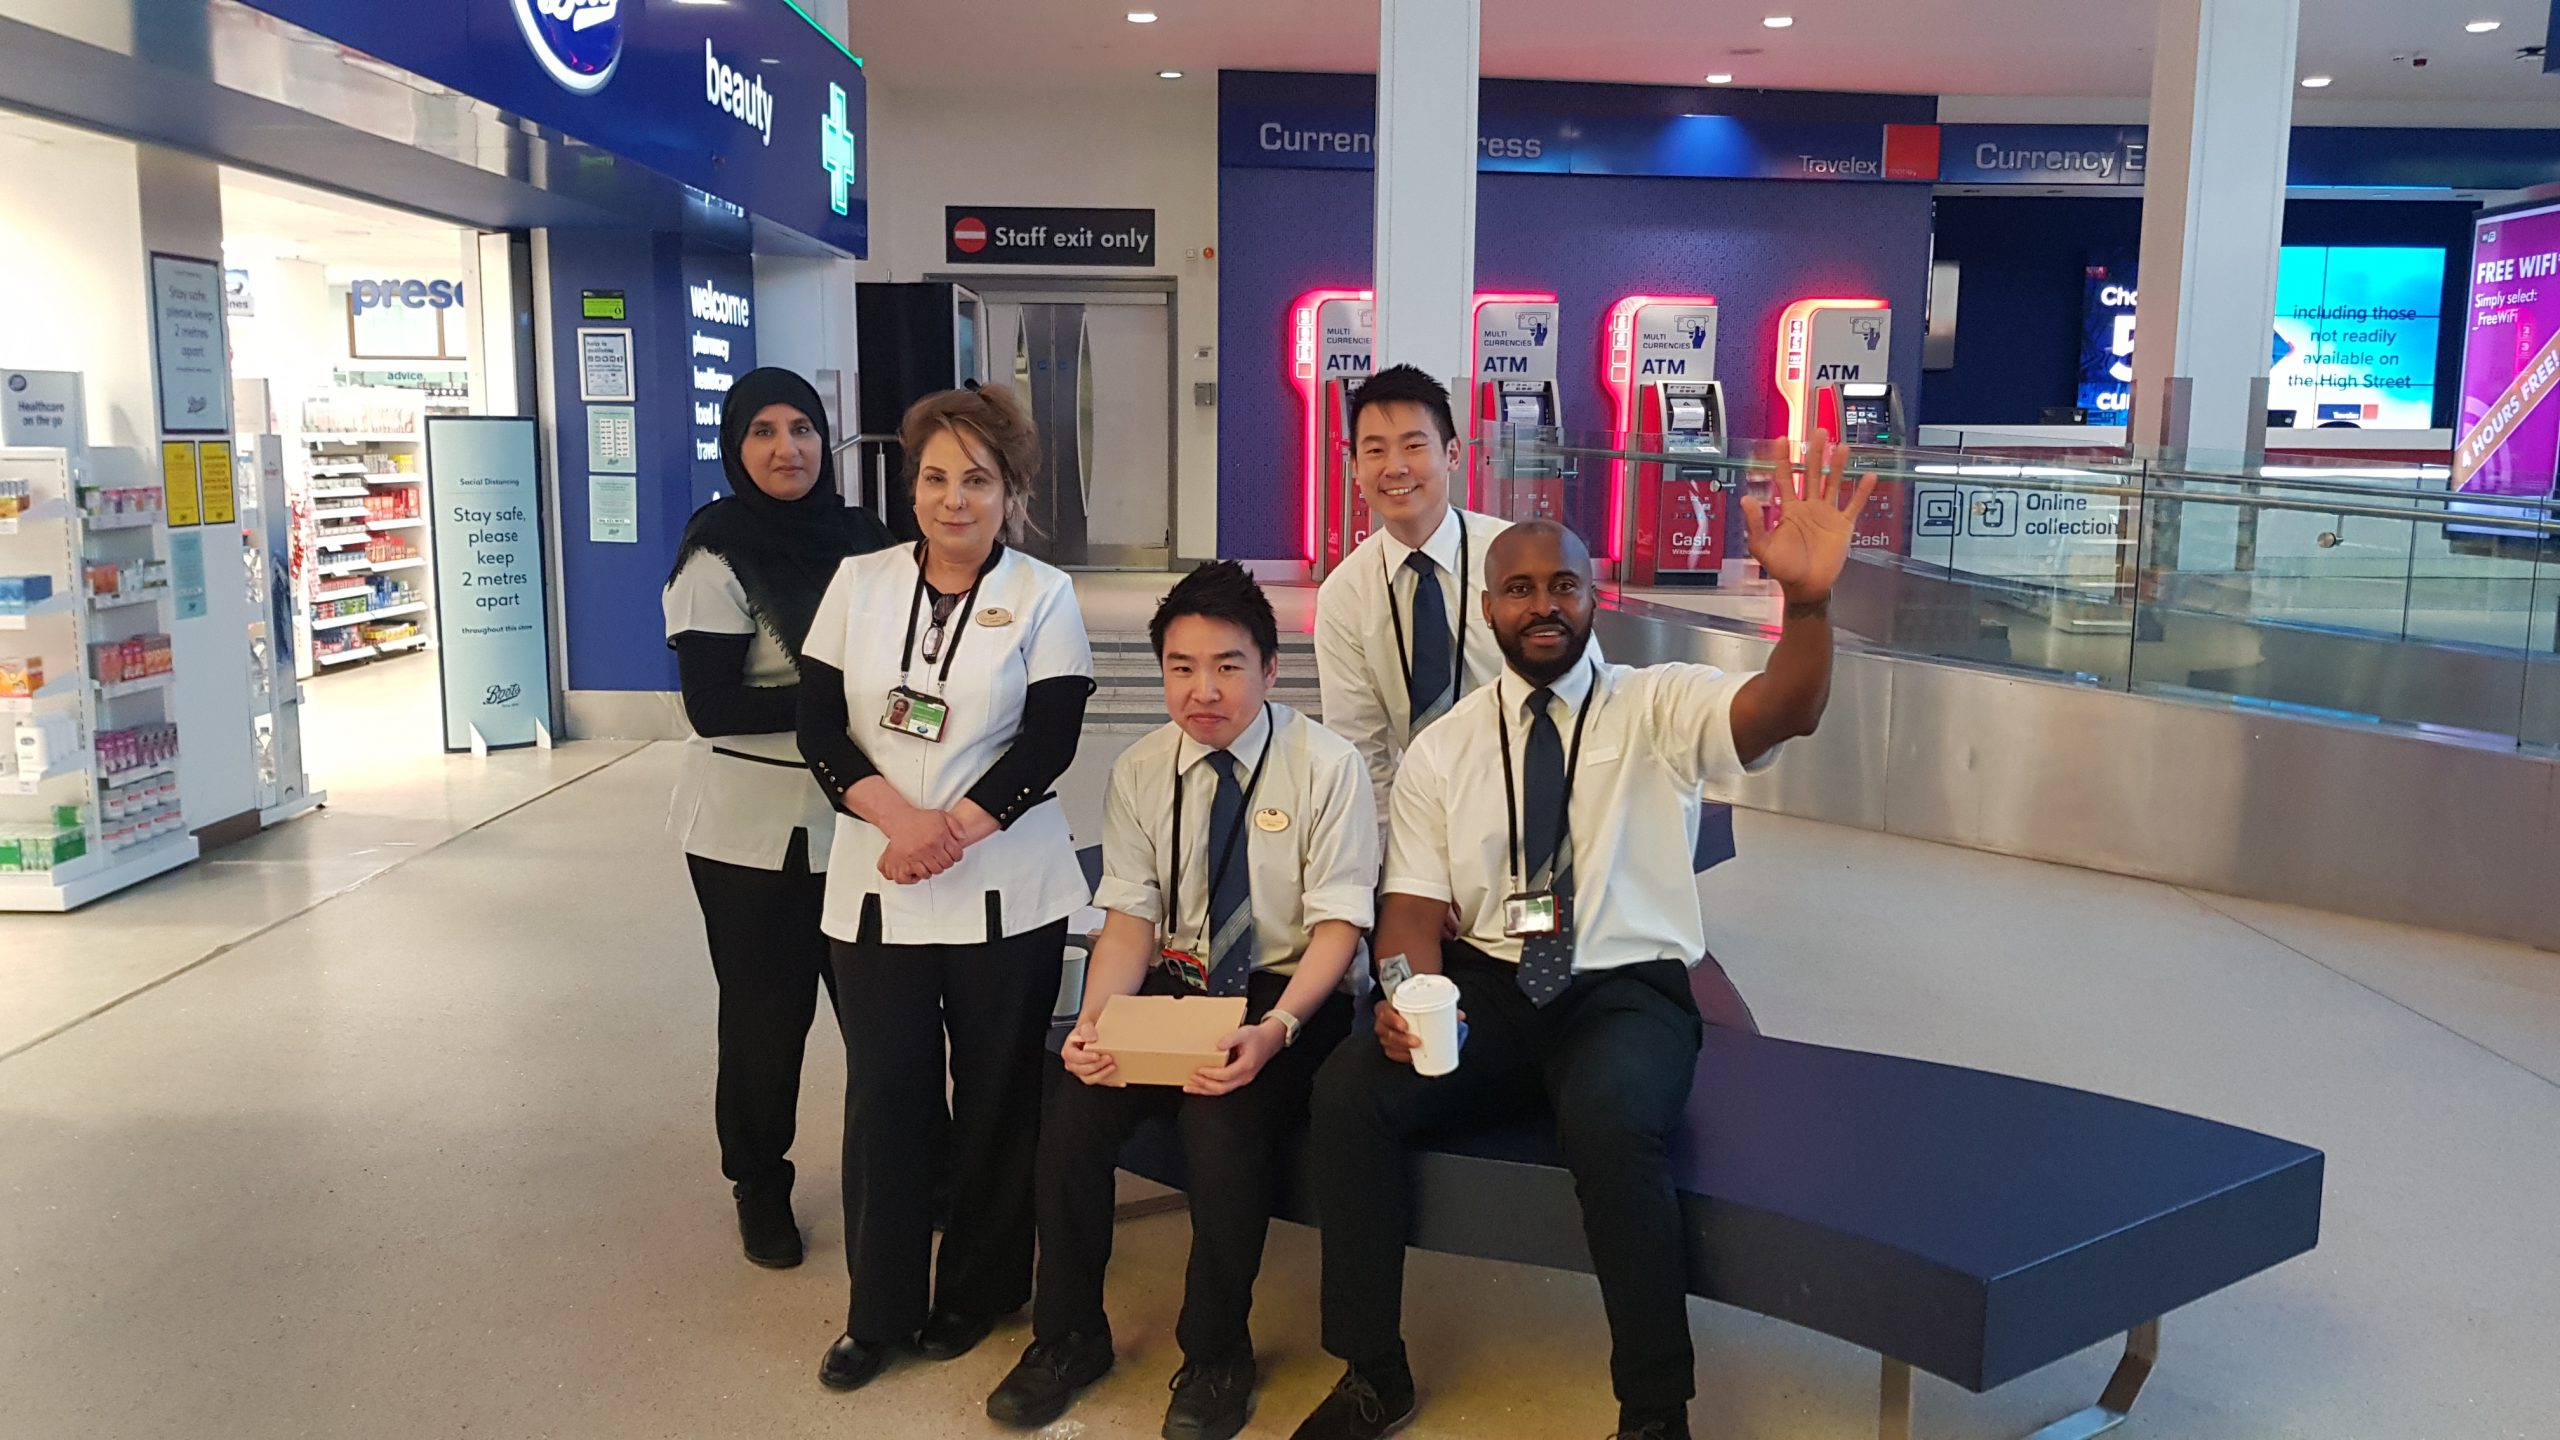 Gavin’s Customer Advisor experience in a Boots Airport Store